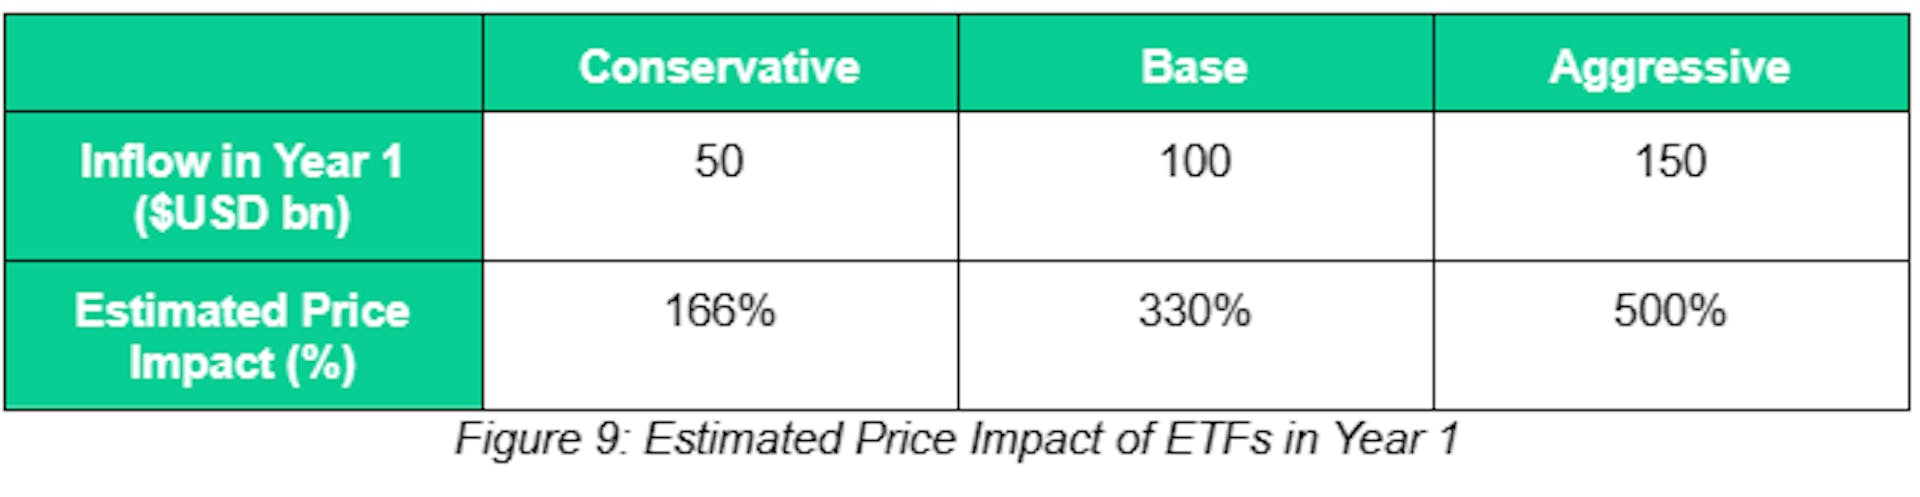 Estimated Price Impact of ETFs in Year 1